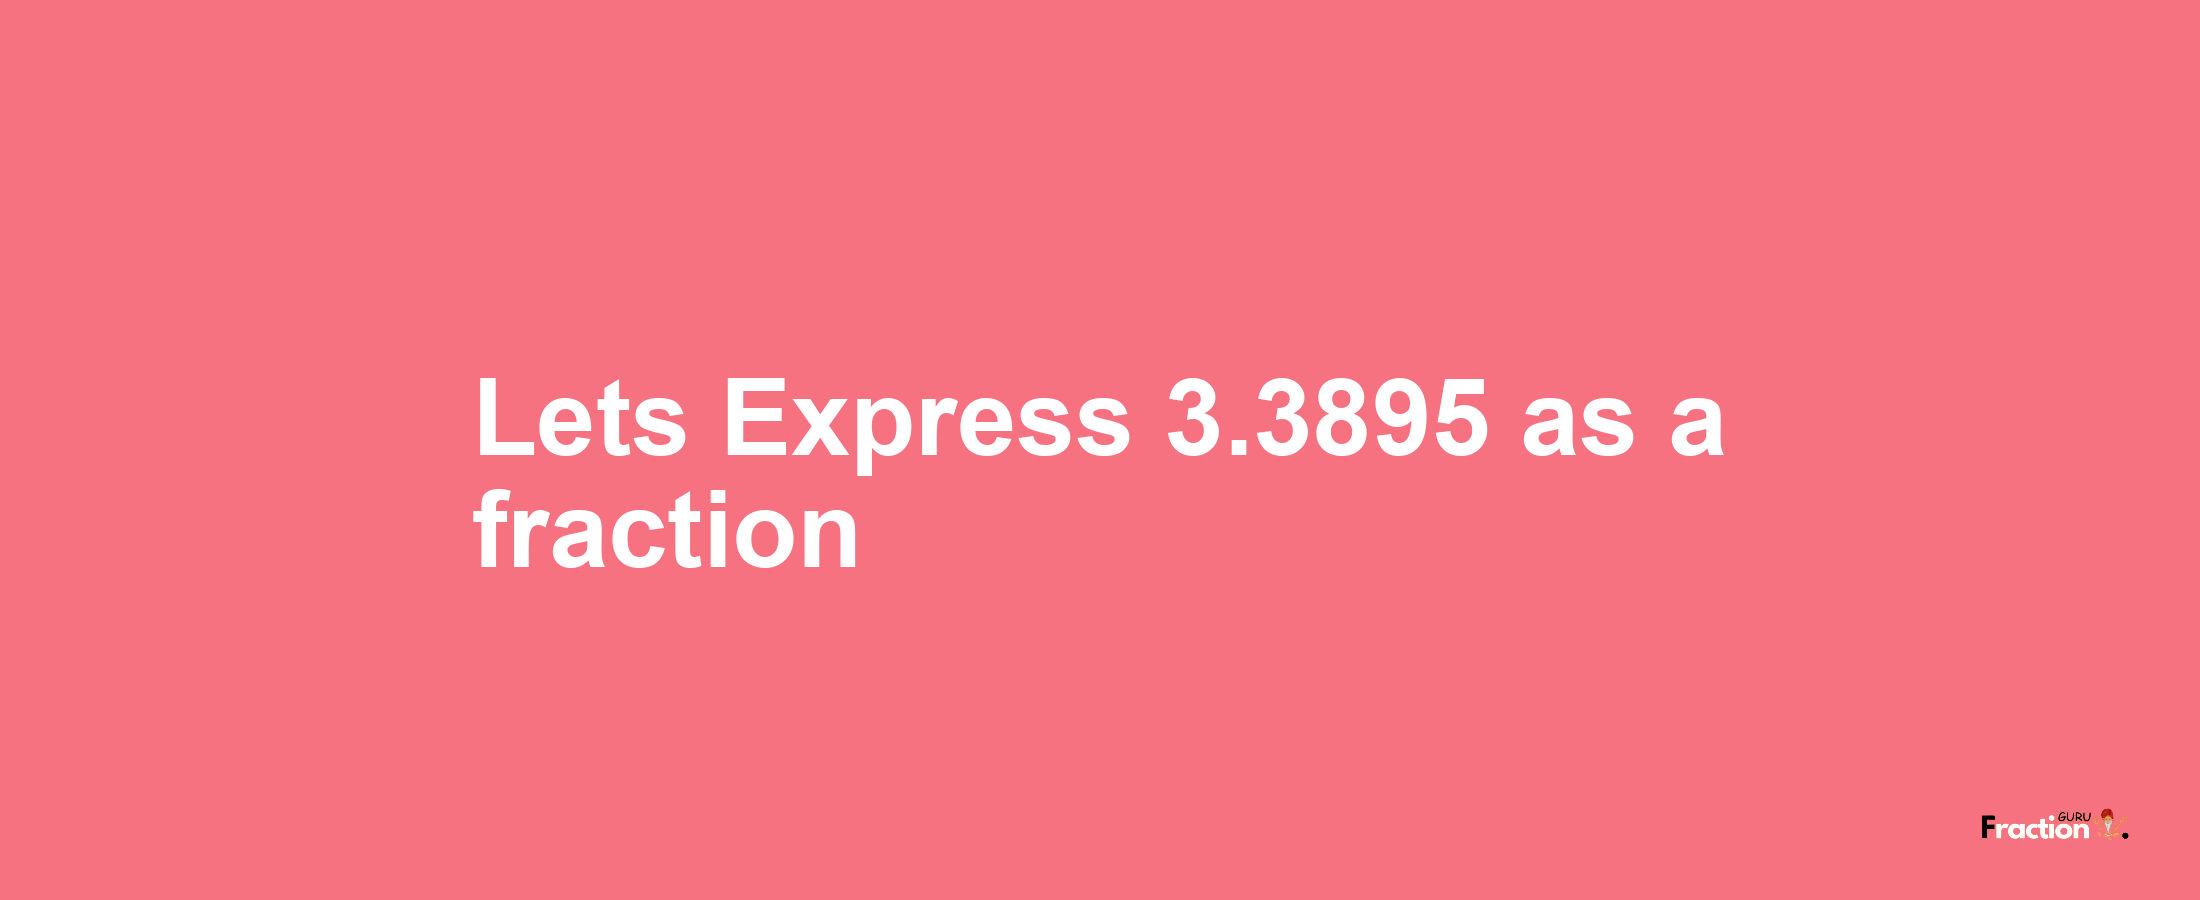 Lets Express 3.3895 as afraction